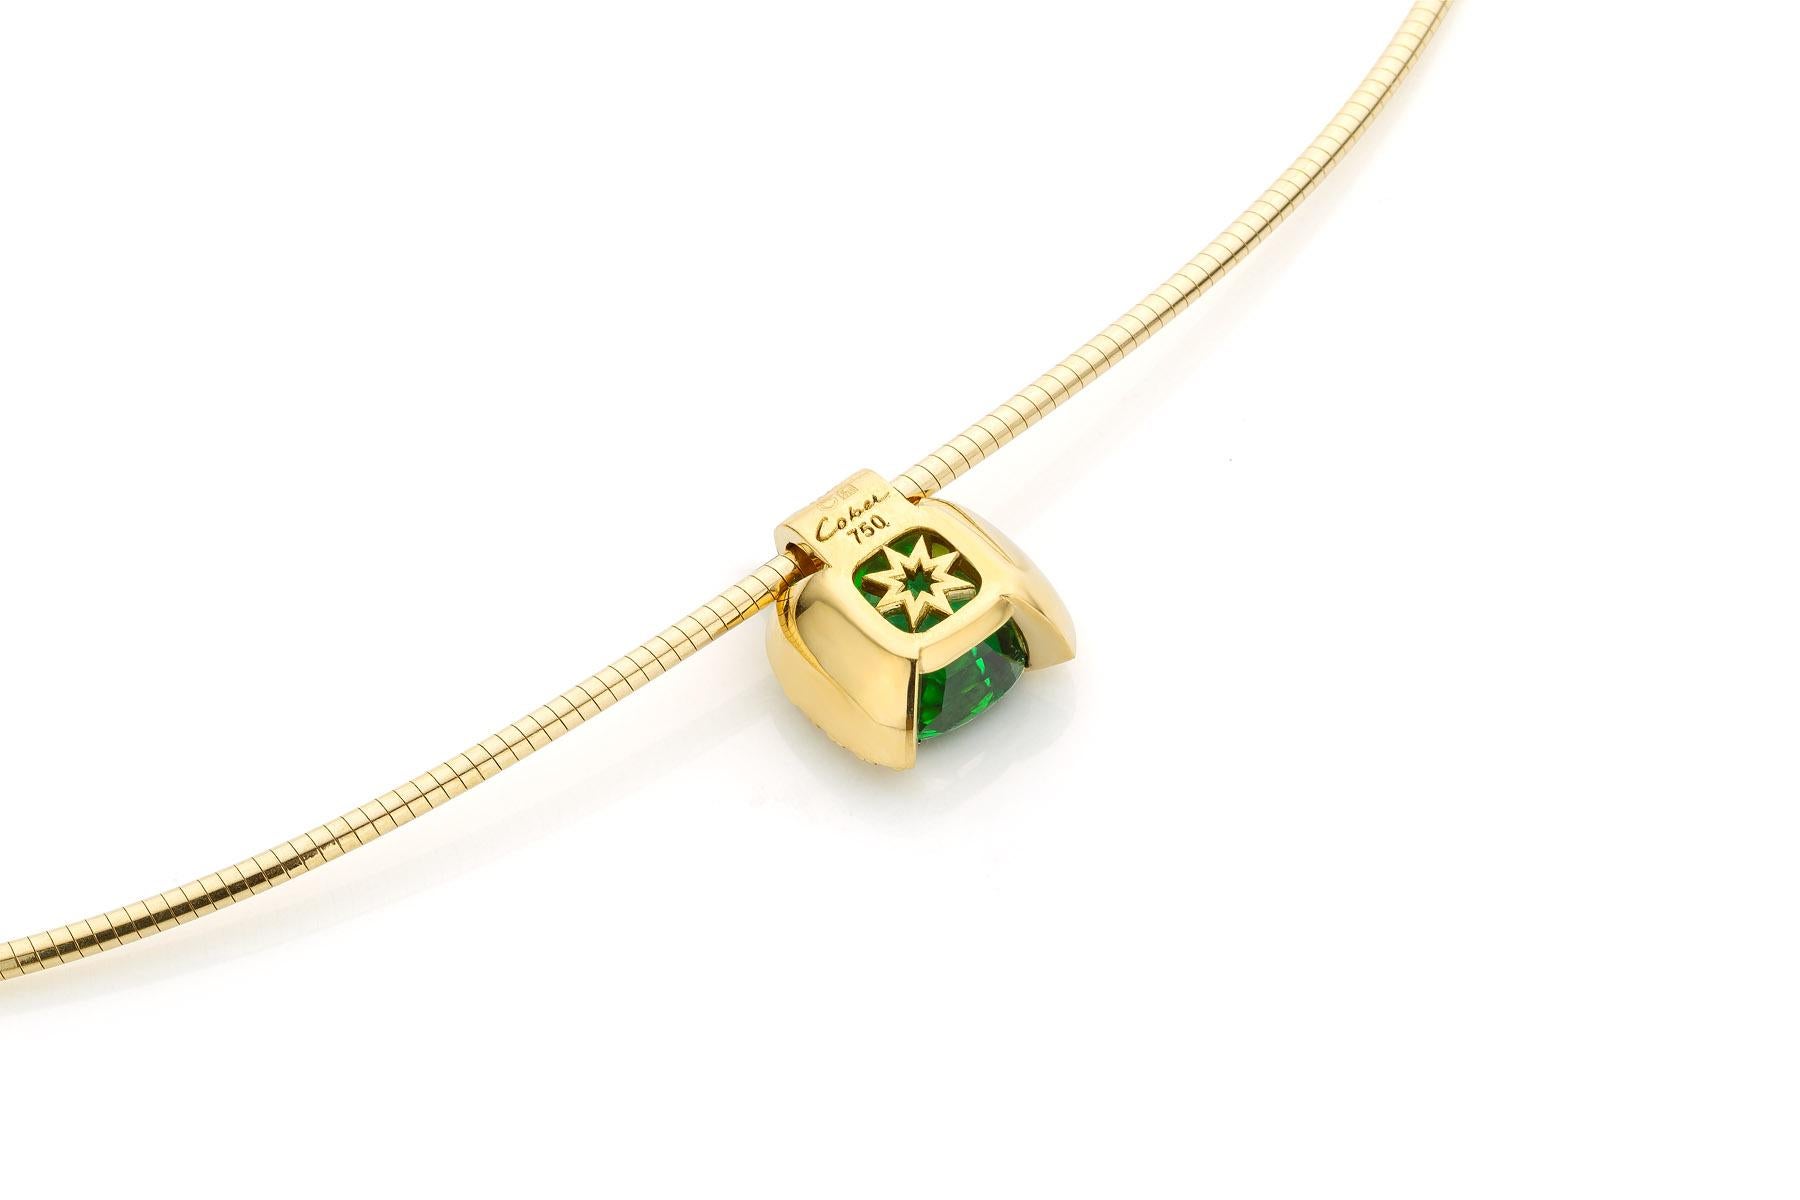 Brilliant Cut Cober Green Tourmaline with 16 Diamonds of 0.16 Carat total Yellow Gold Pendant For Sale